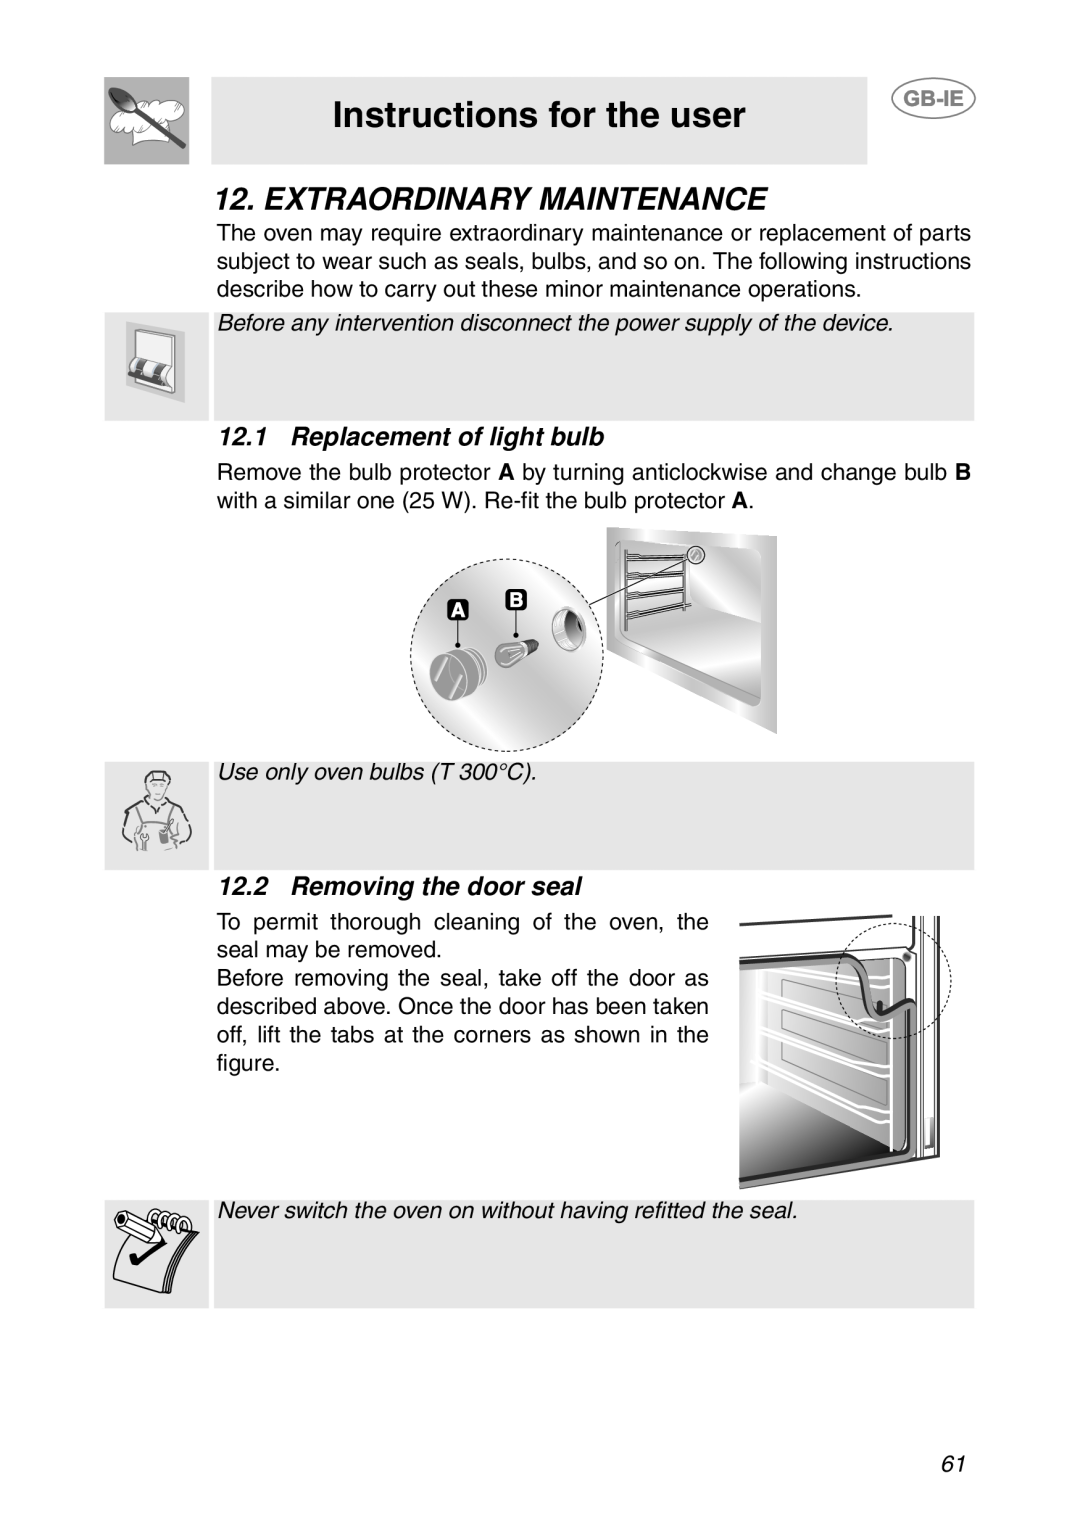 Smeg S200EB/1 Extraordinary Maintenance, Replacement of light bulb, Removing the door seal, Instructions for the user 